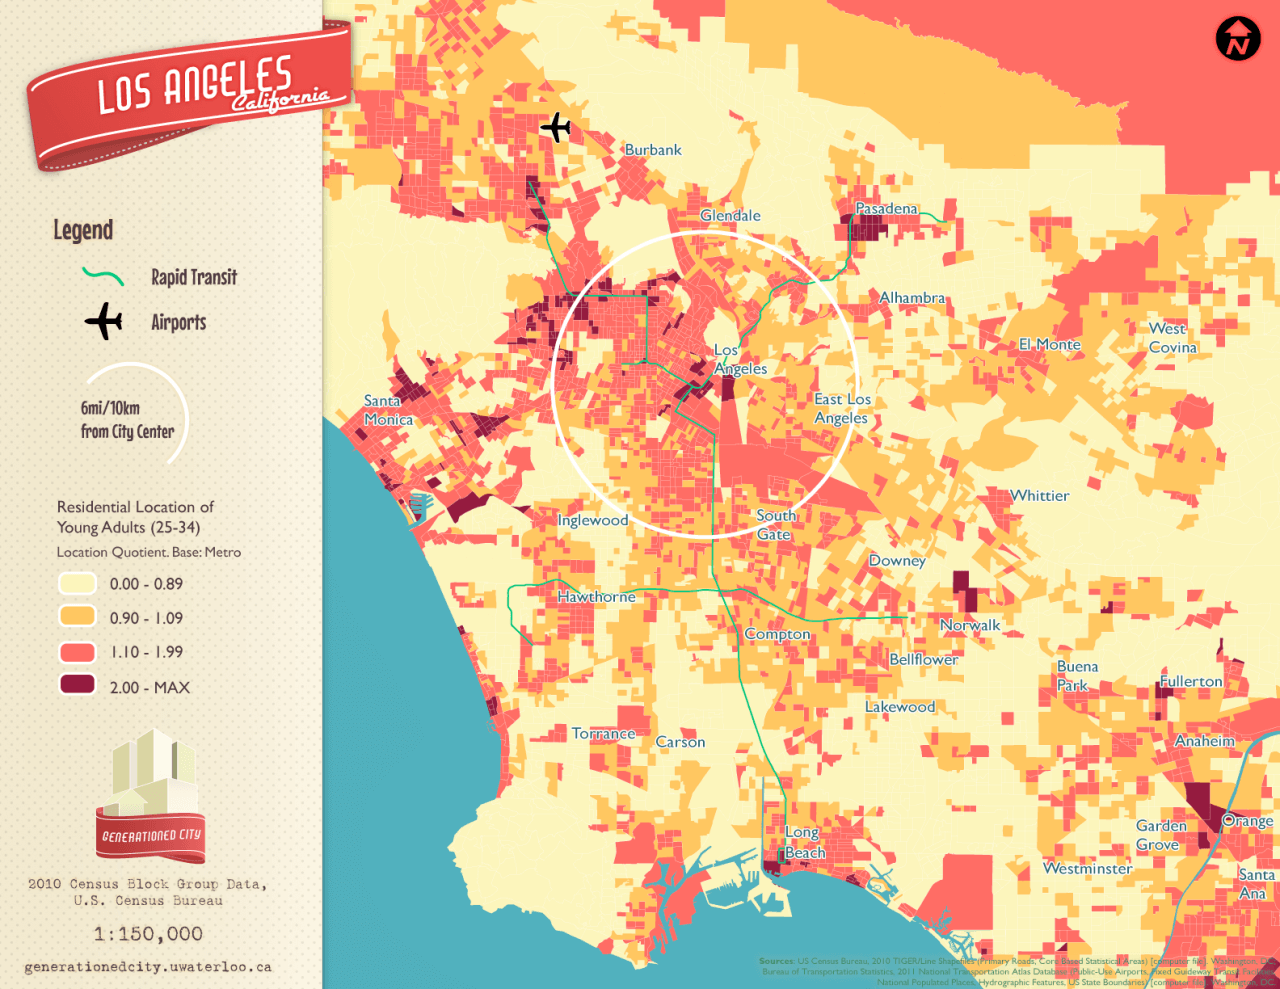 Residential location of young adults in Los Angeles.